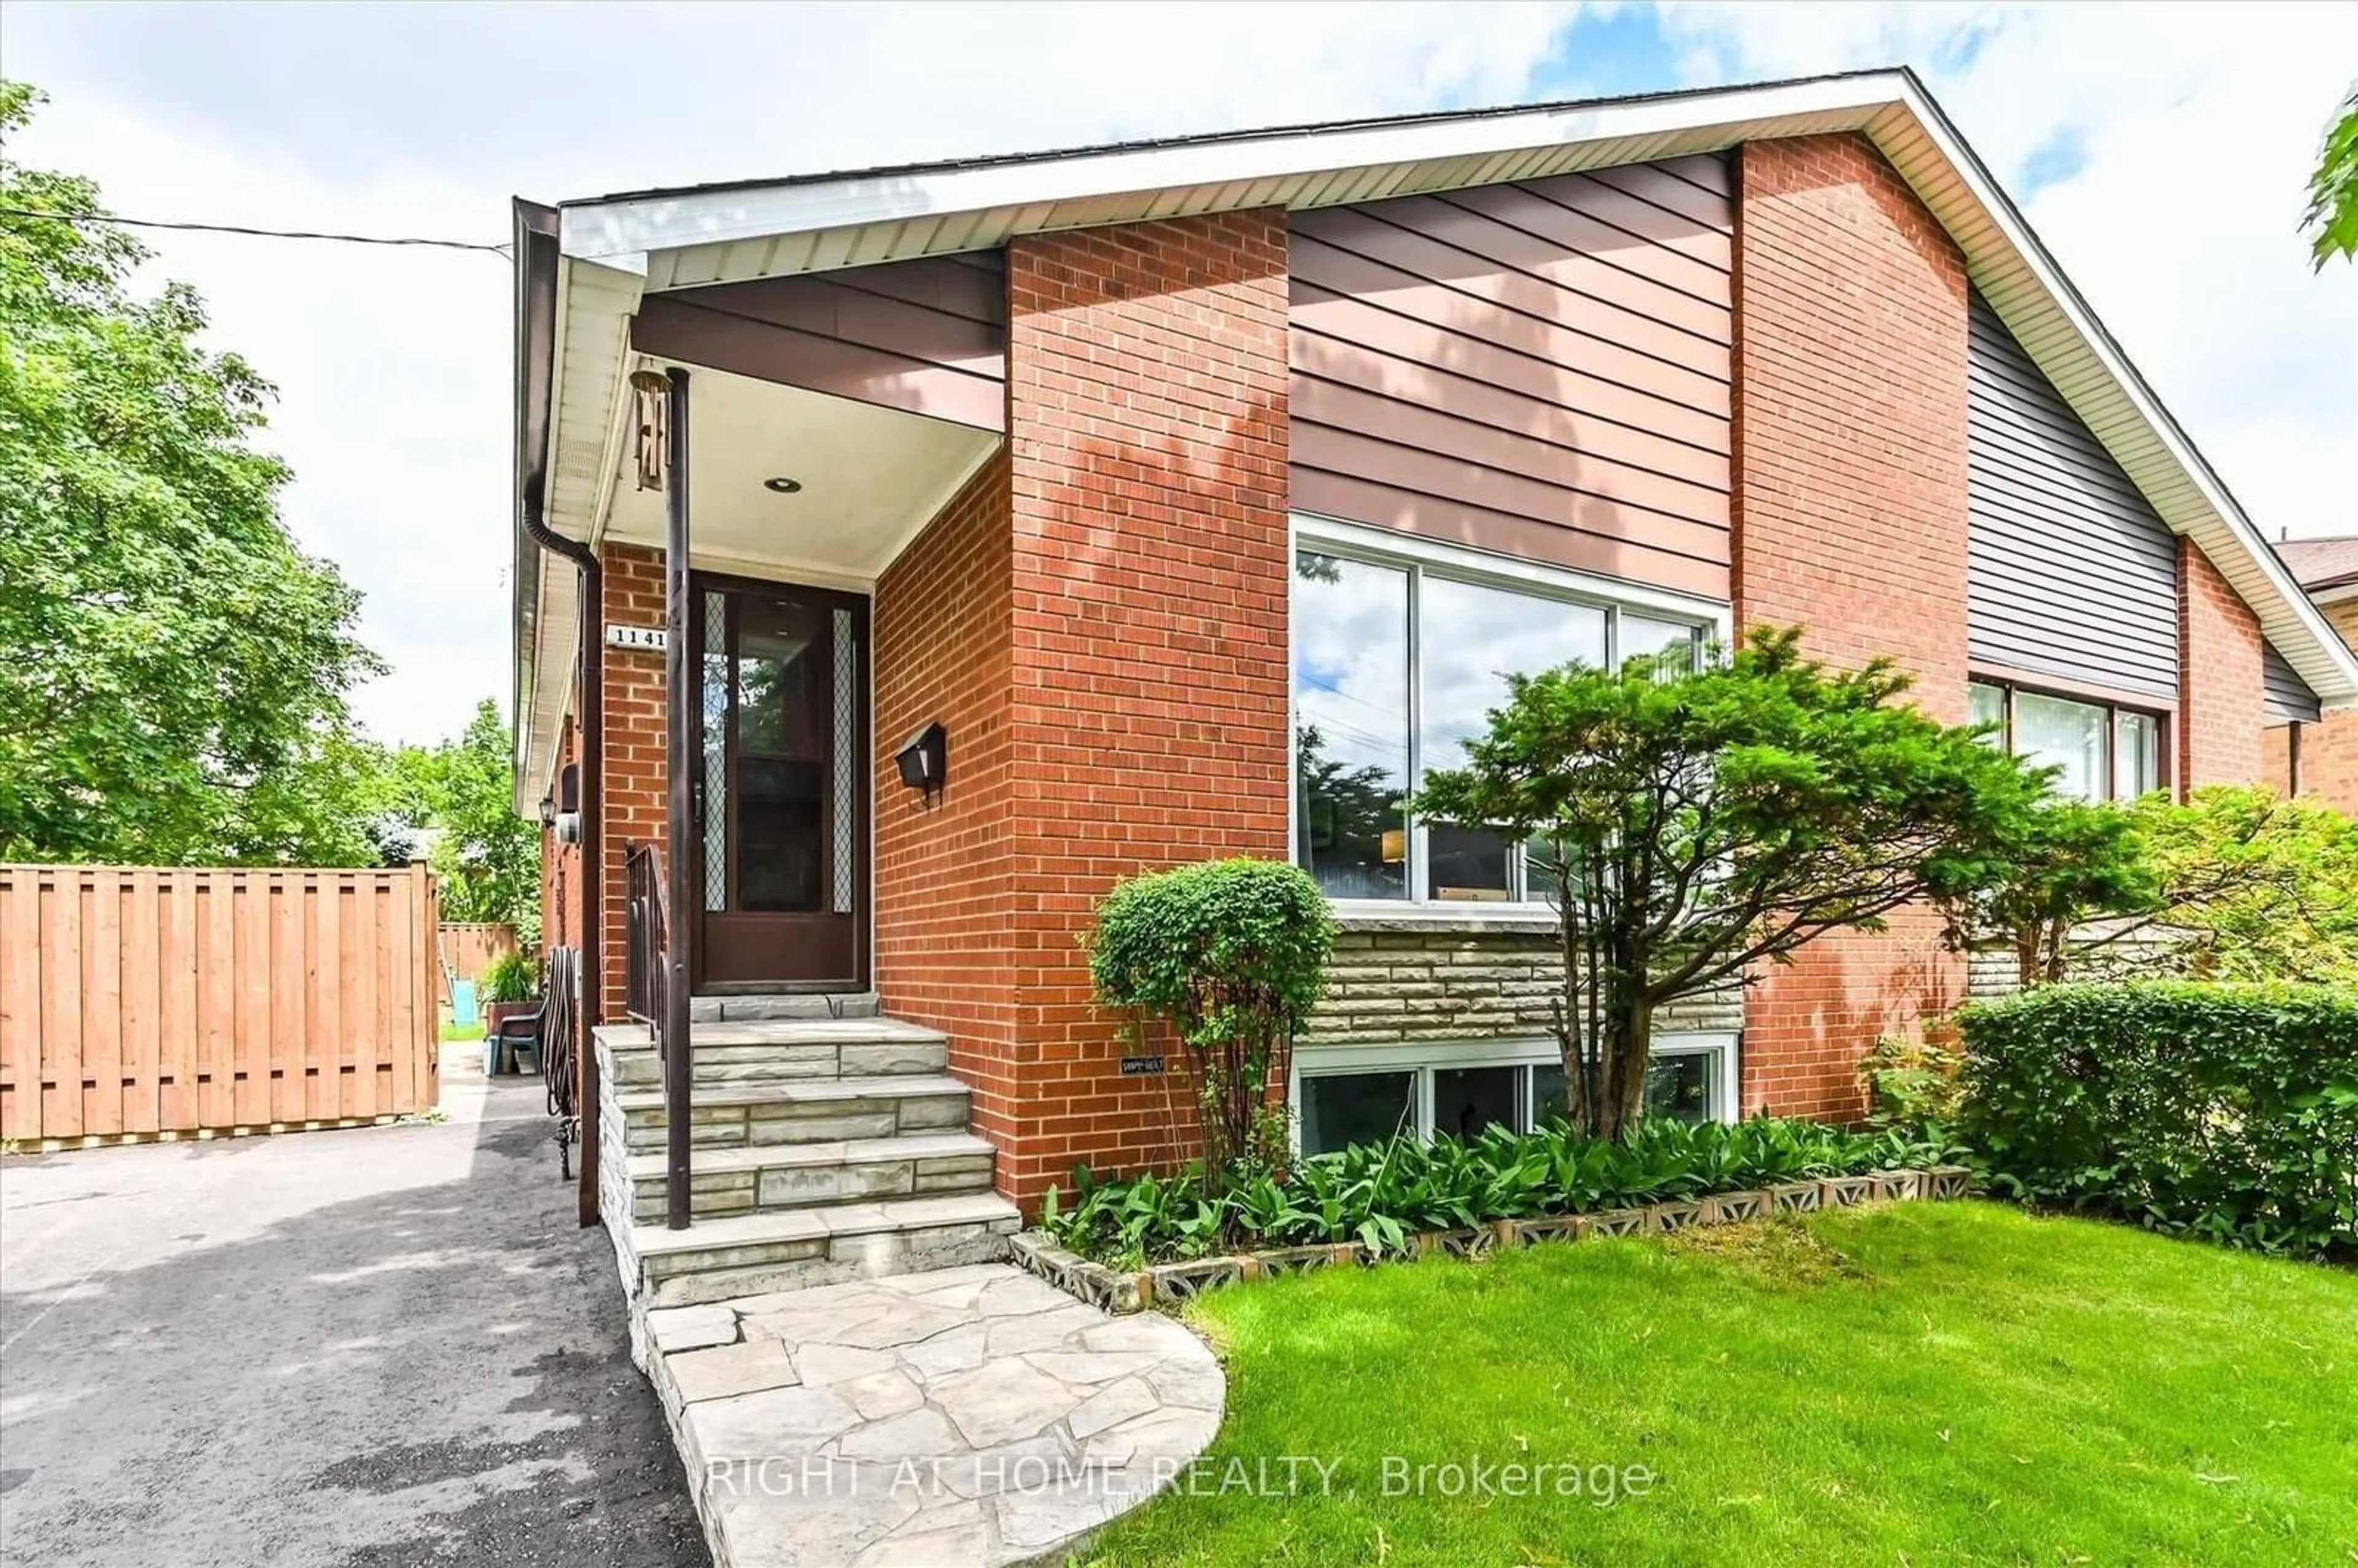 Home with brick exterior material for 1141 Flagship Dr, Mississauga Ontario L4Y 2K3